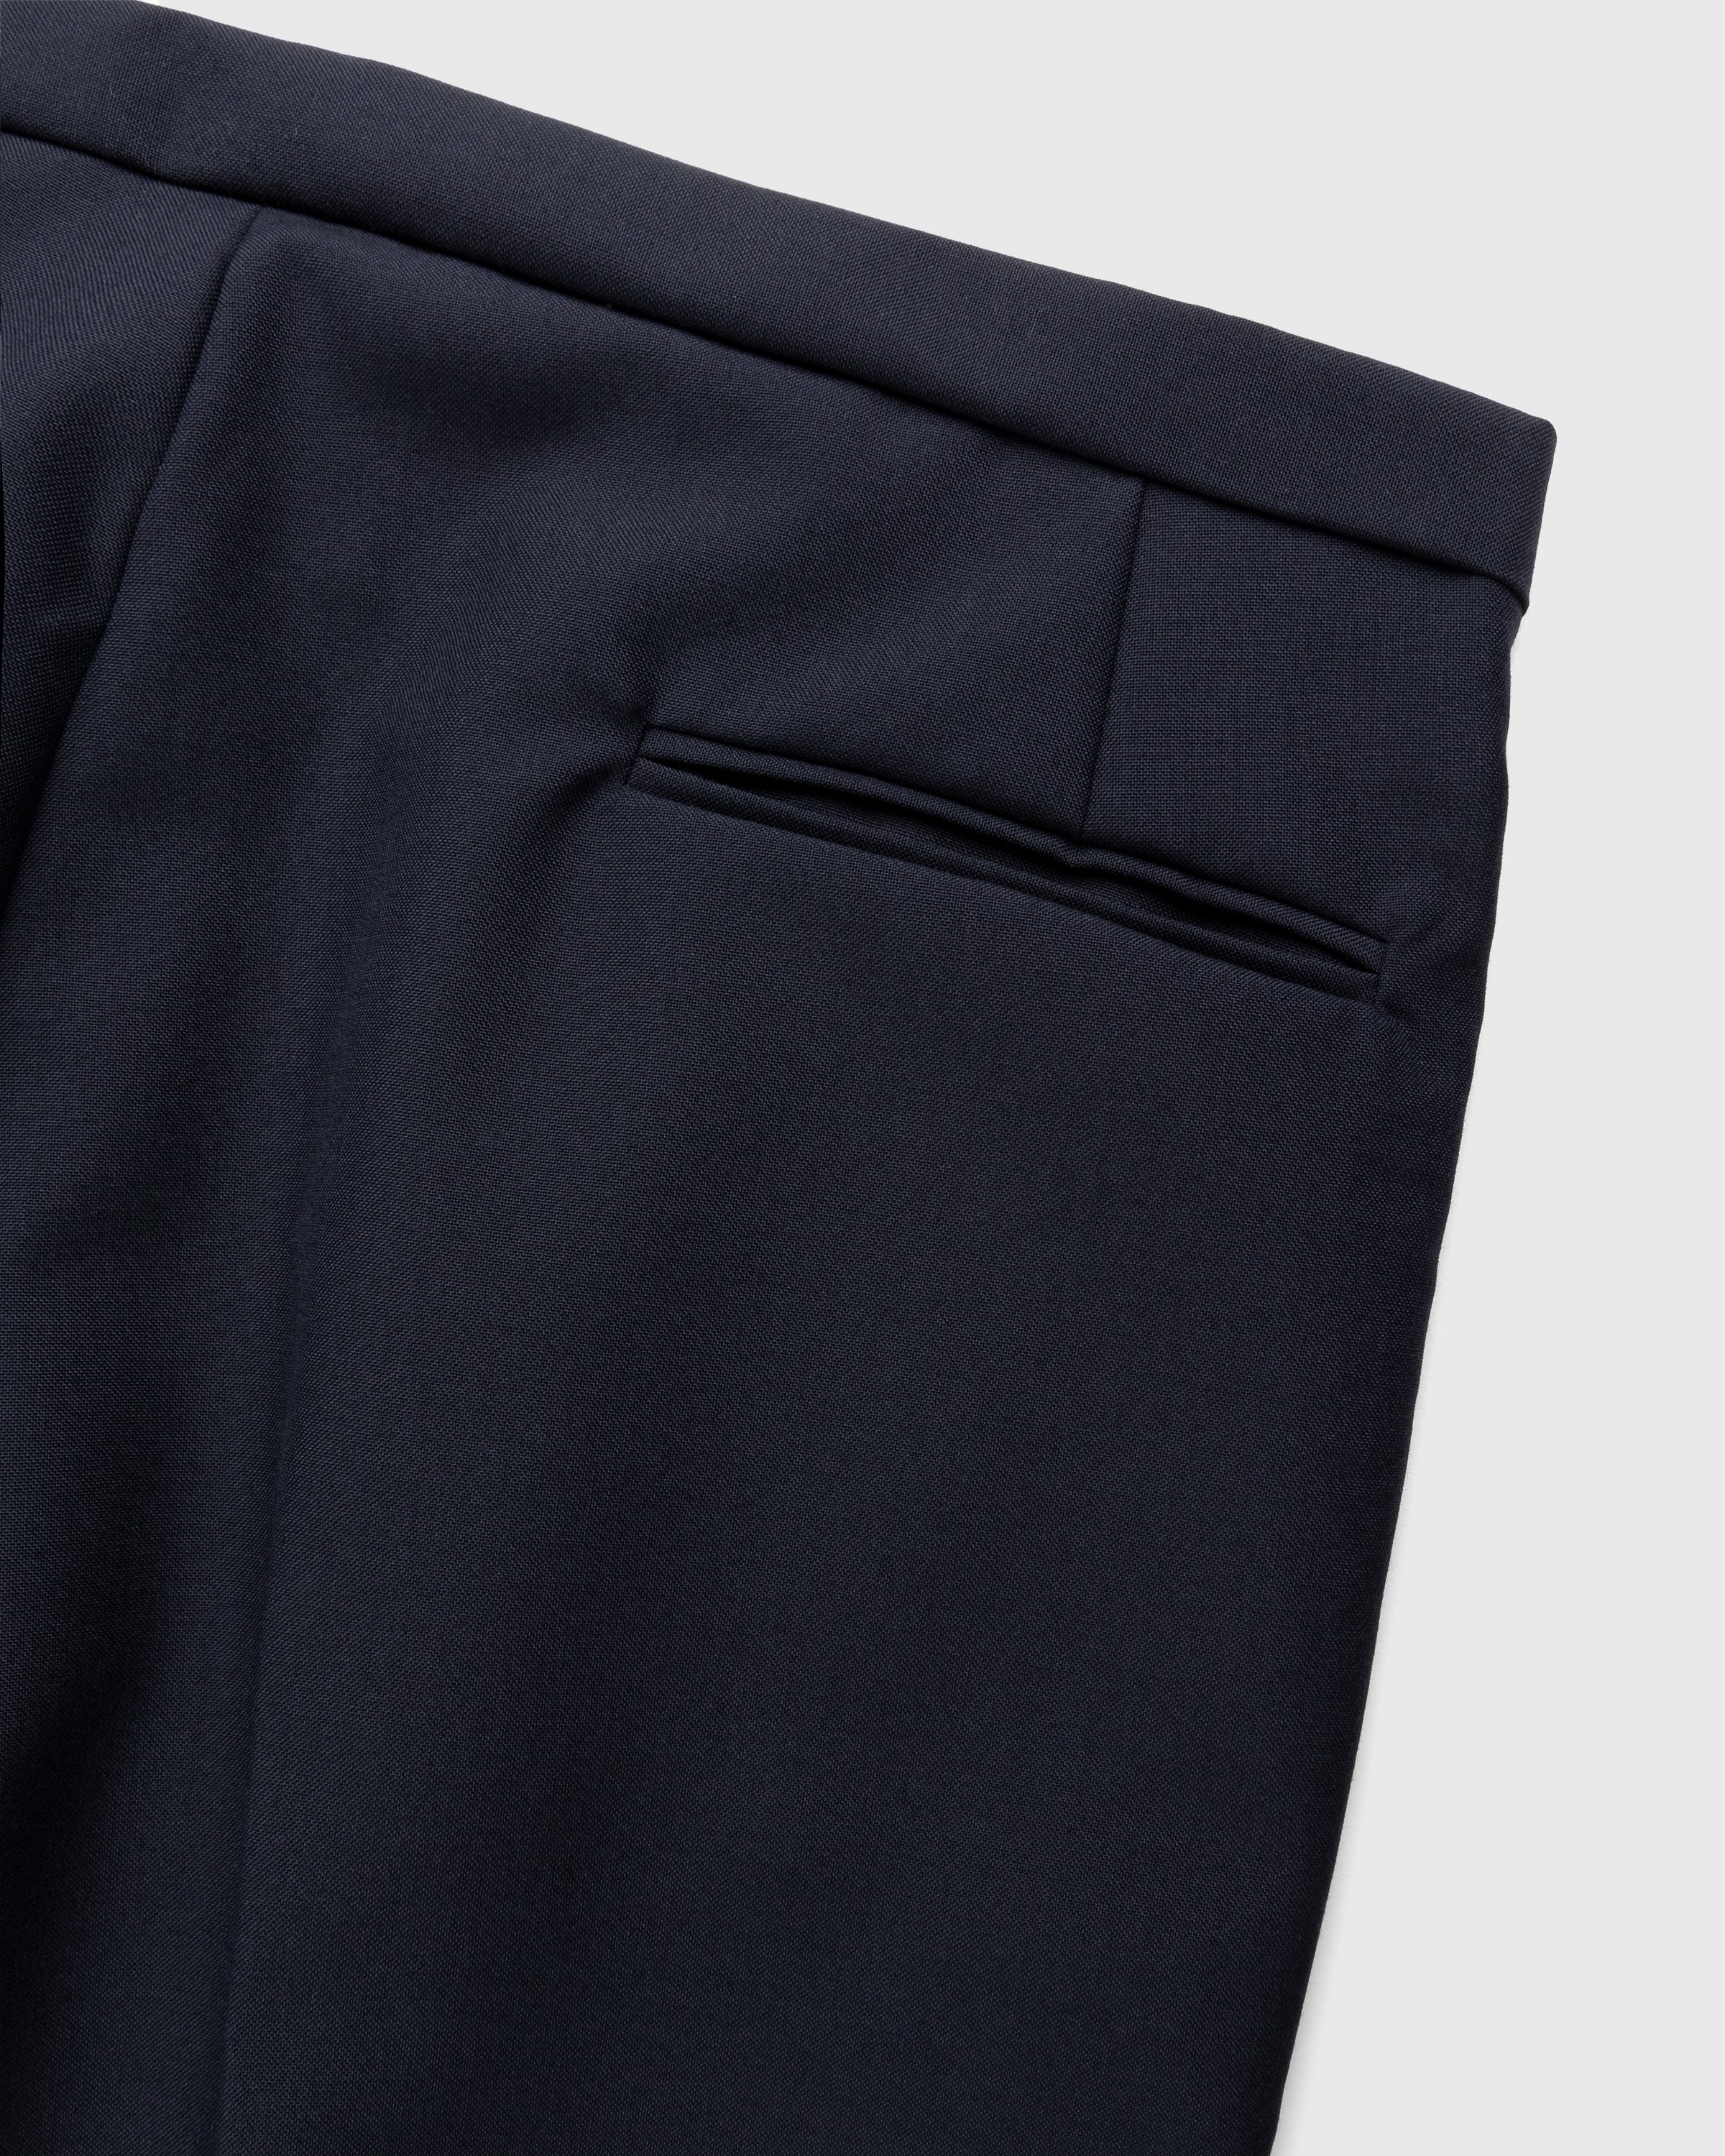 Winnie New York - Pleated Wool Trousers Navy - Clothing - Blue - Image 5